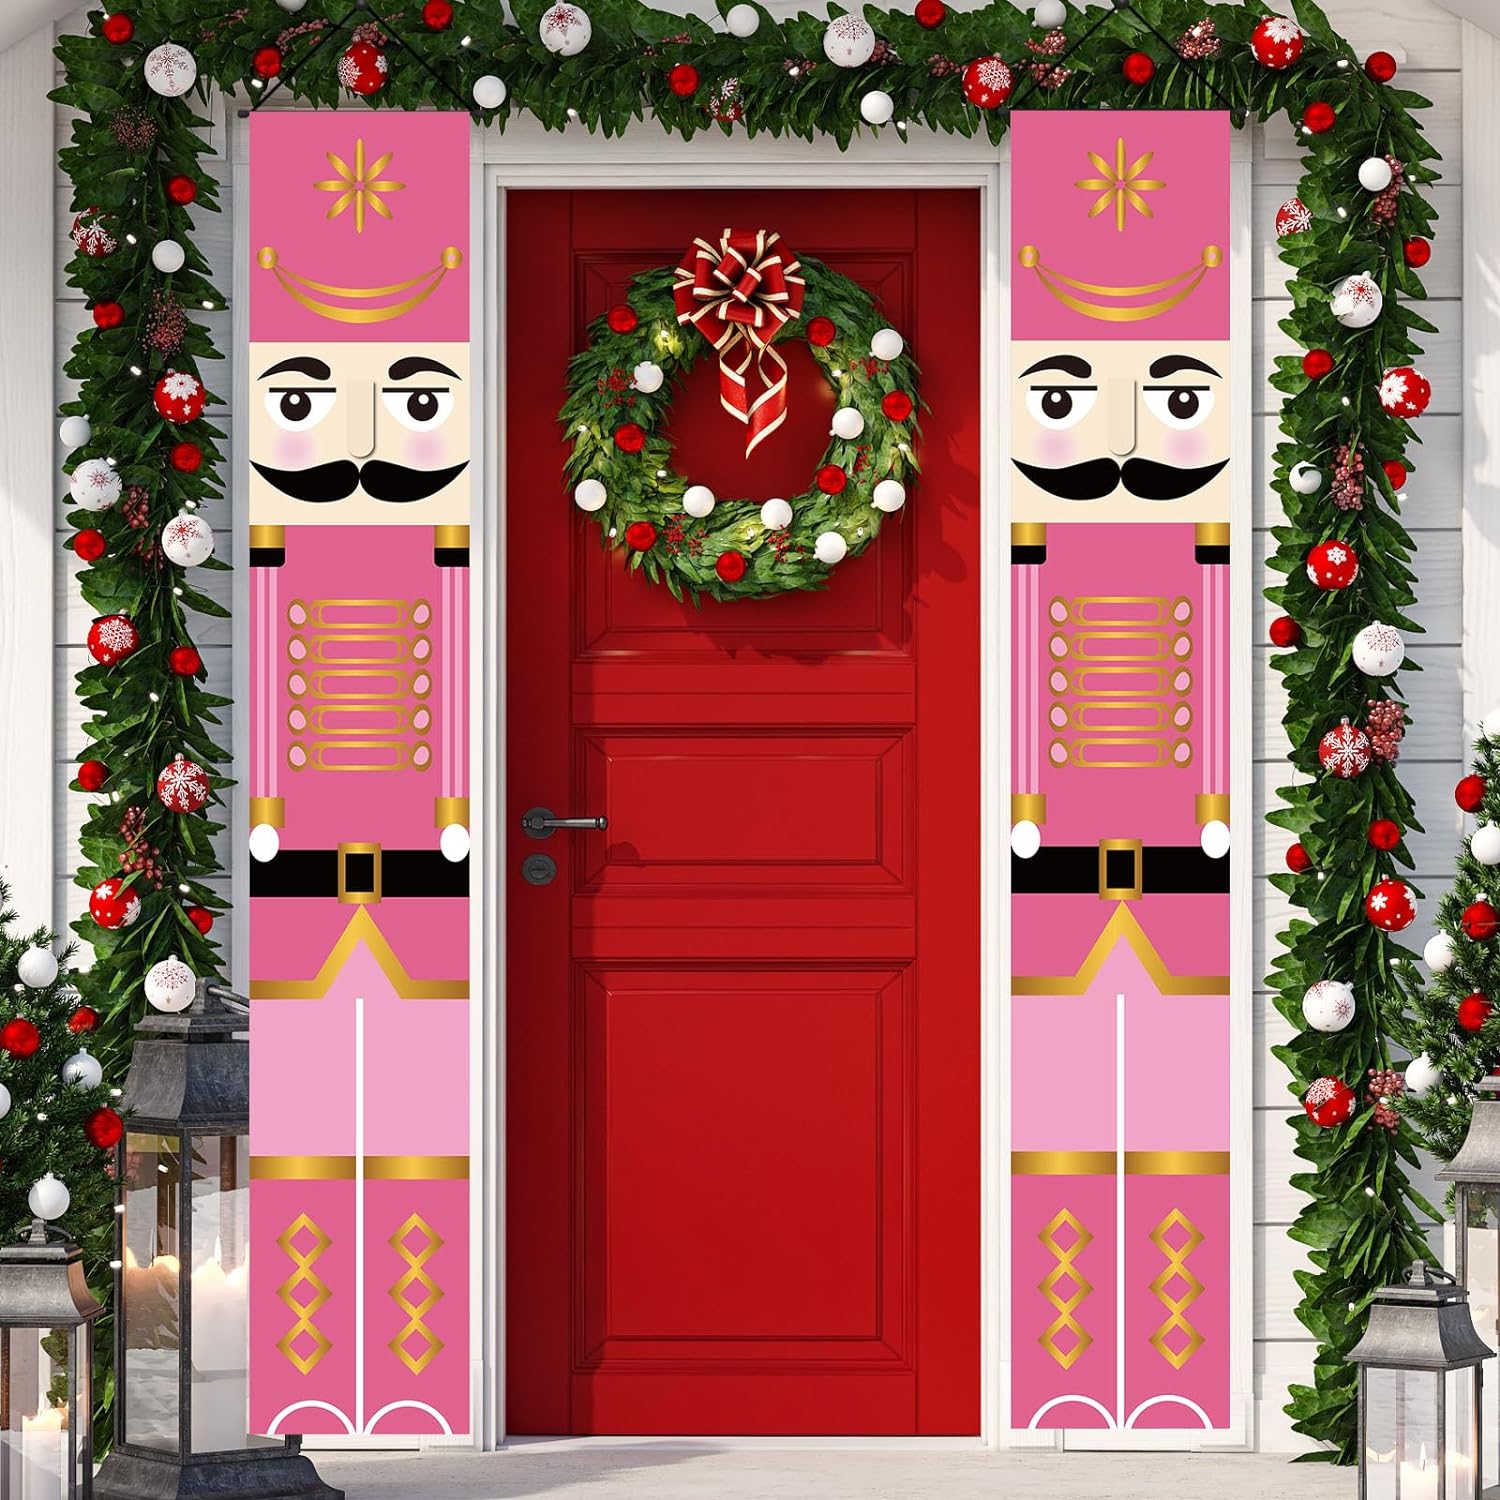 Great Choice Products Pink Nutcracker Christmas Decorations Pink Nutcracker Porch Banner Outdoor Christmas Nutcracker Decorations And Supplies For ?